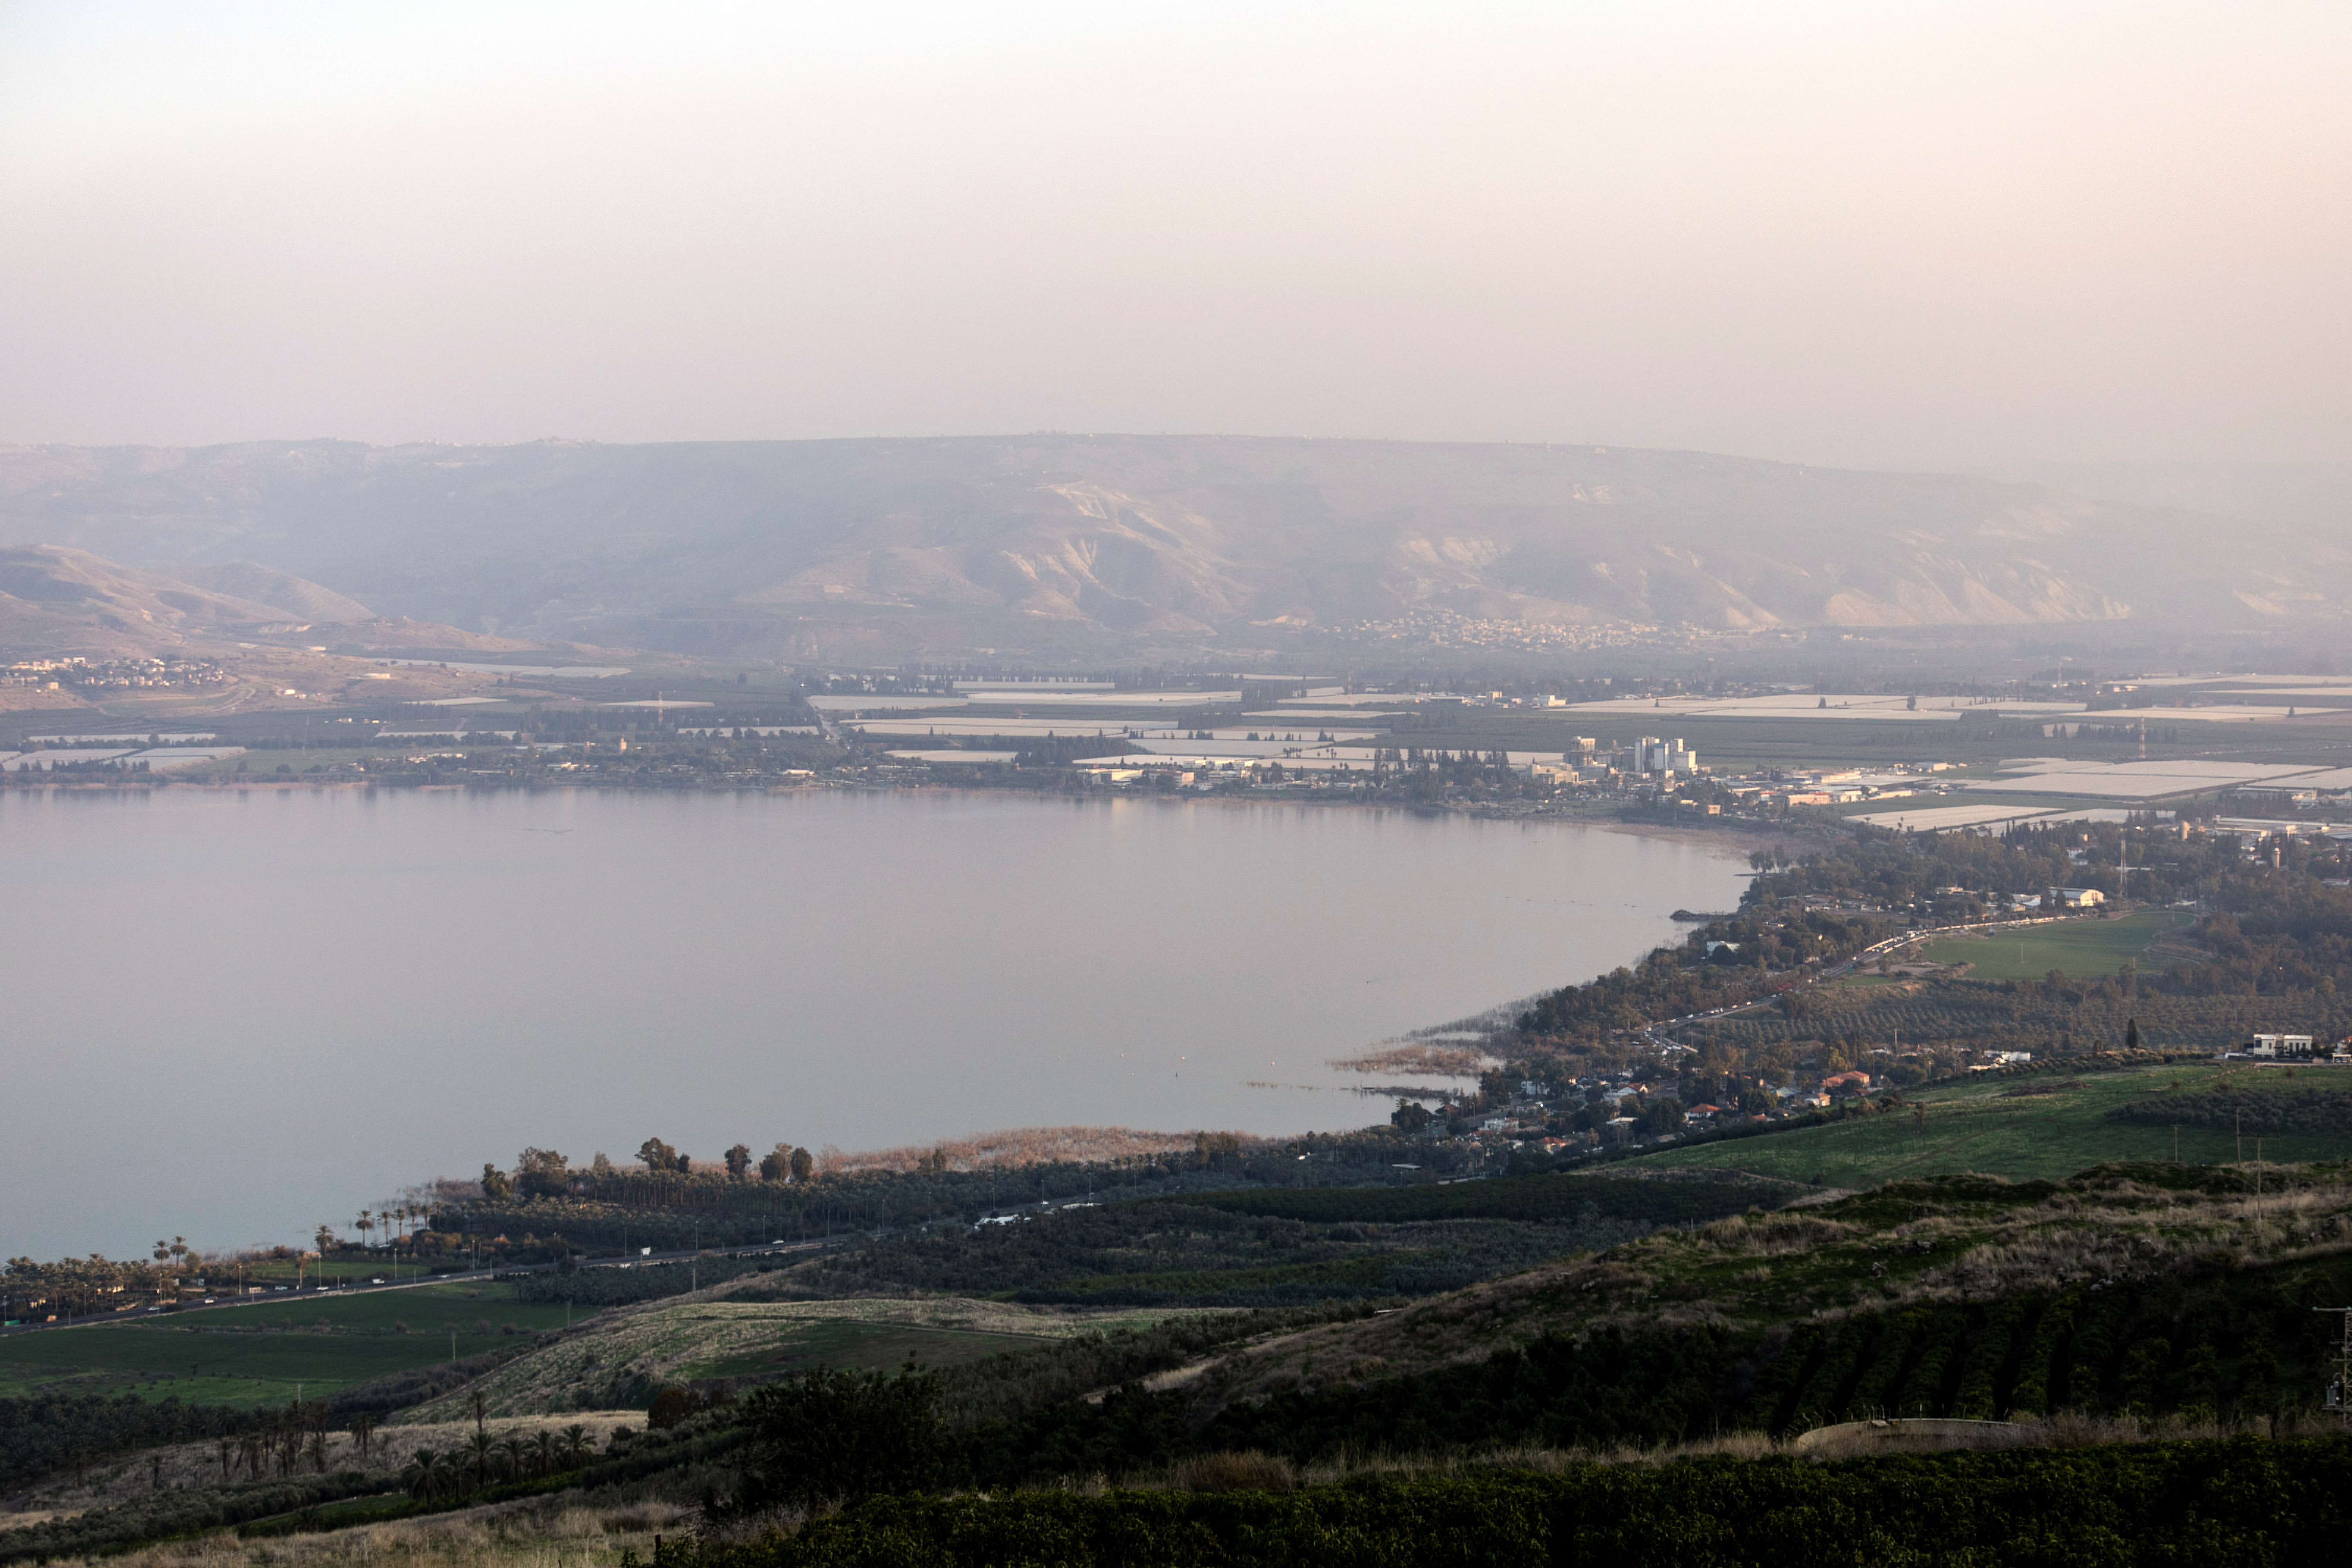 A general view of the Sea of Galilee with Jordan in the background